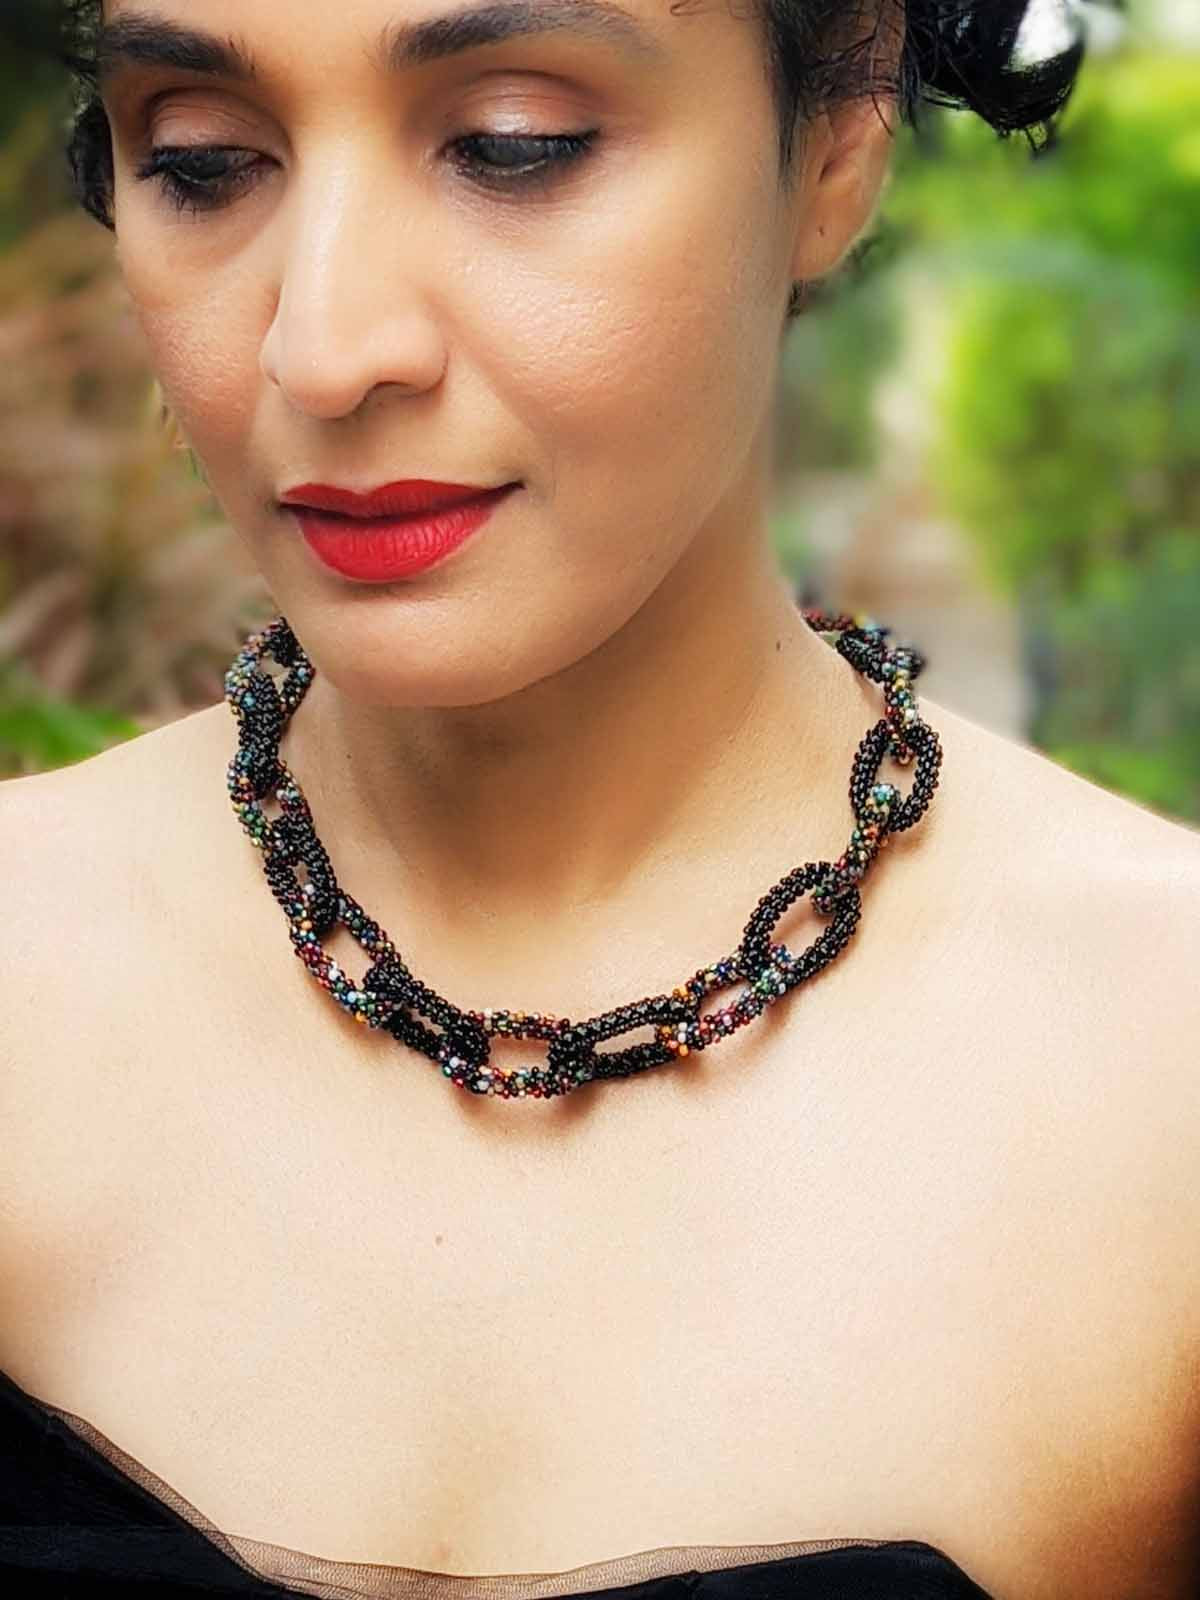 The Chain-Links Necklace in Black